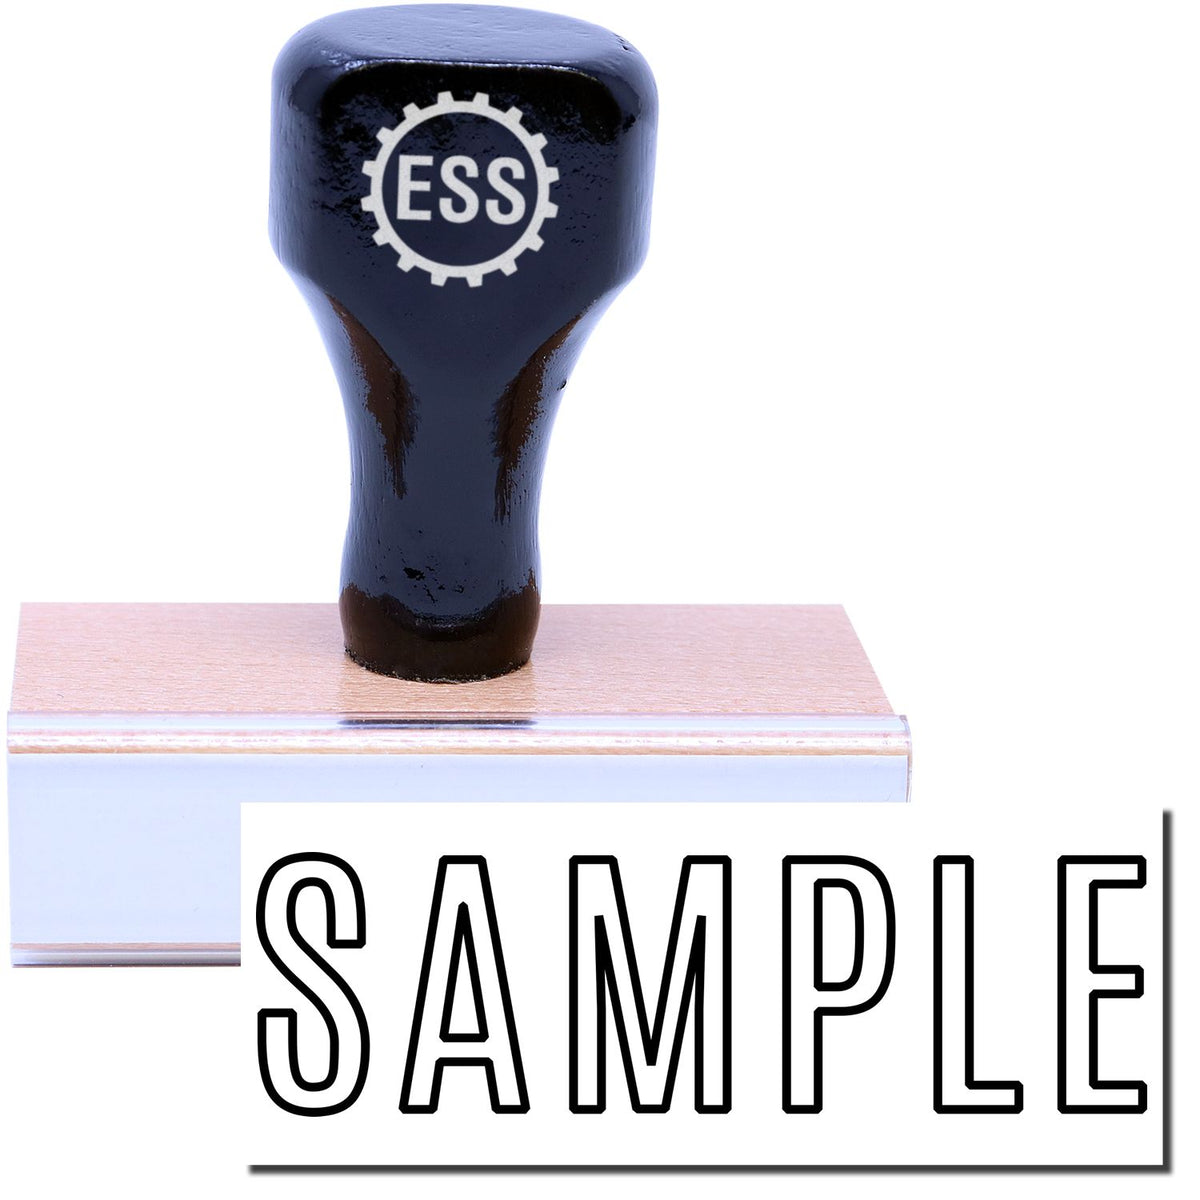 A stock office rubber stamp with a stamped image showing how the text &quot;SAMPLE&quot; in a large outline font is displayed after stamping.